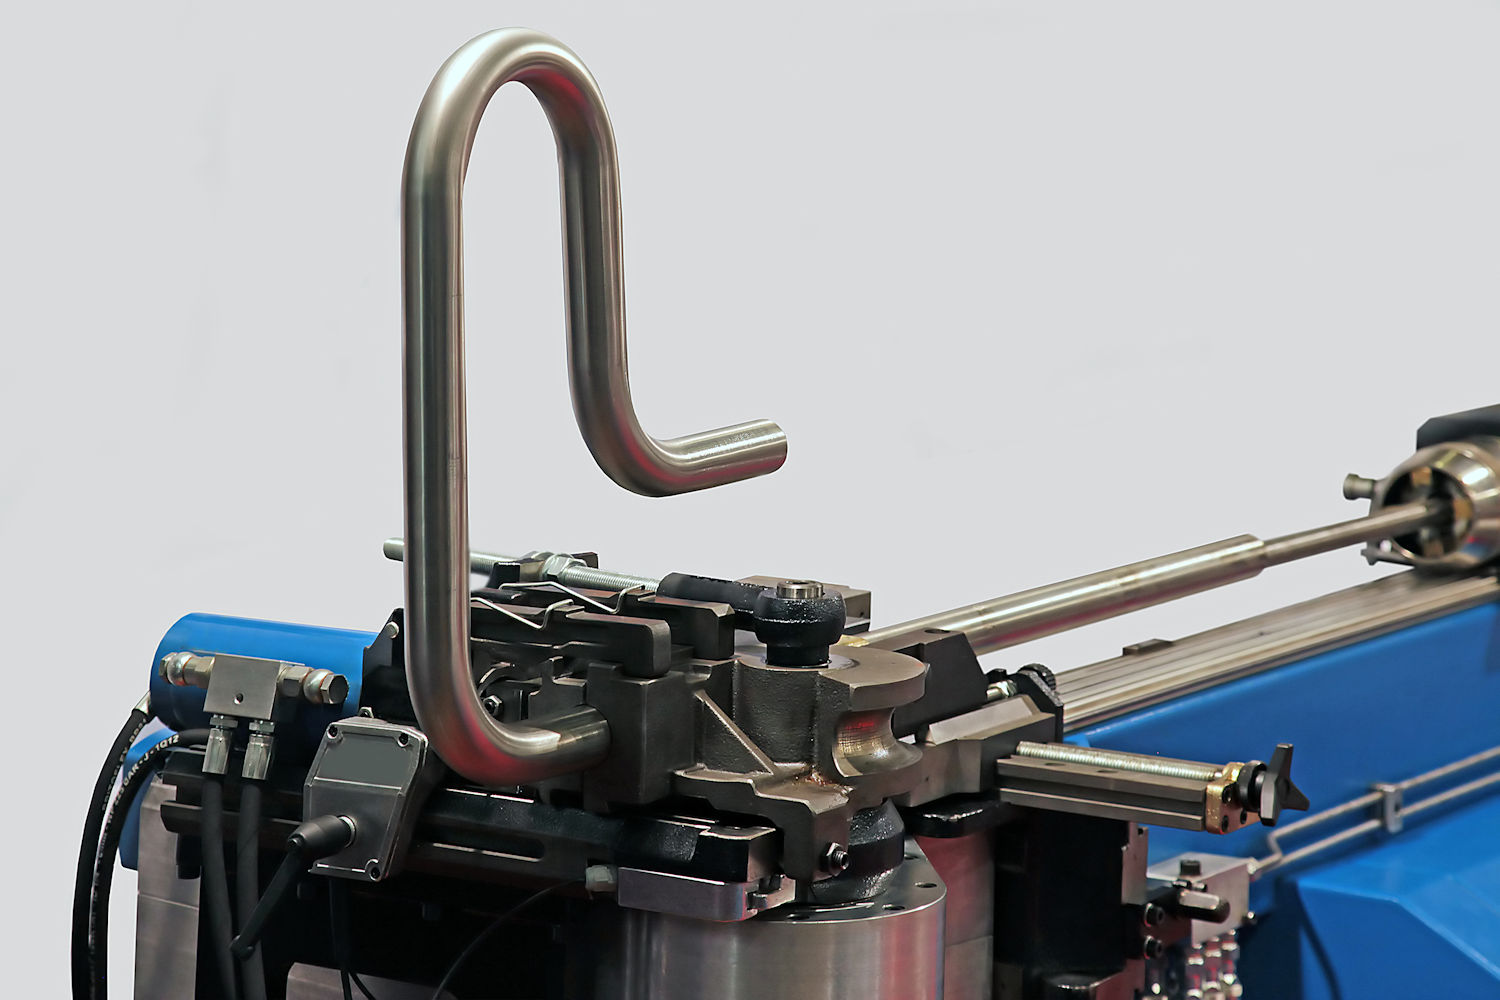 What are the configuration components of the transmission spindle of the pipe bending machine?